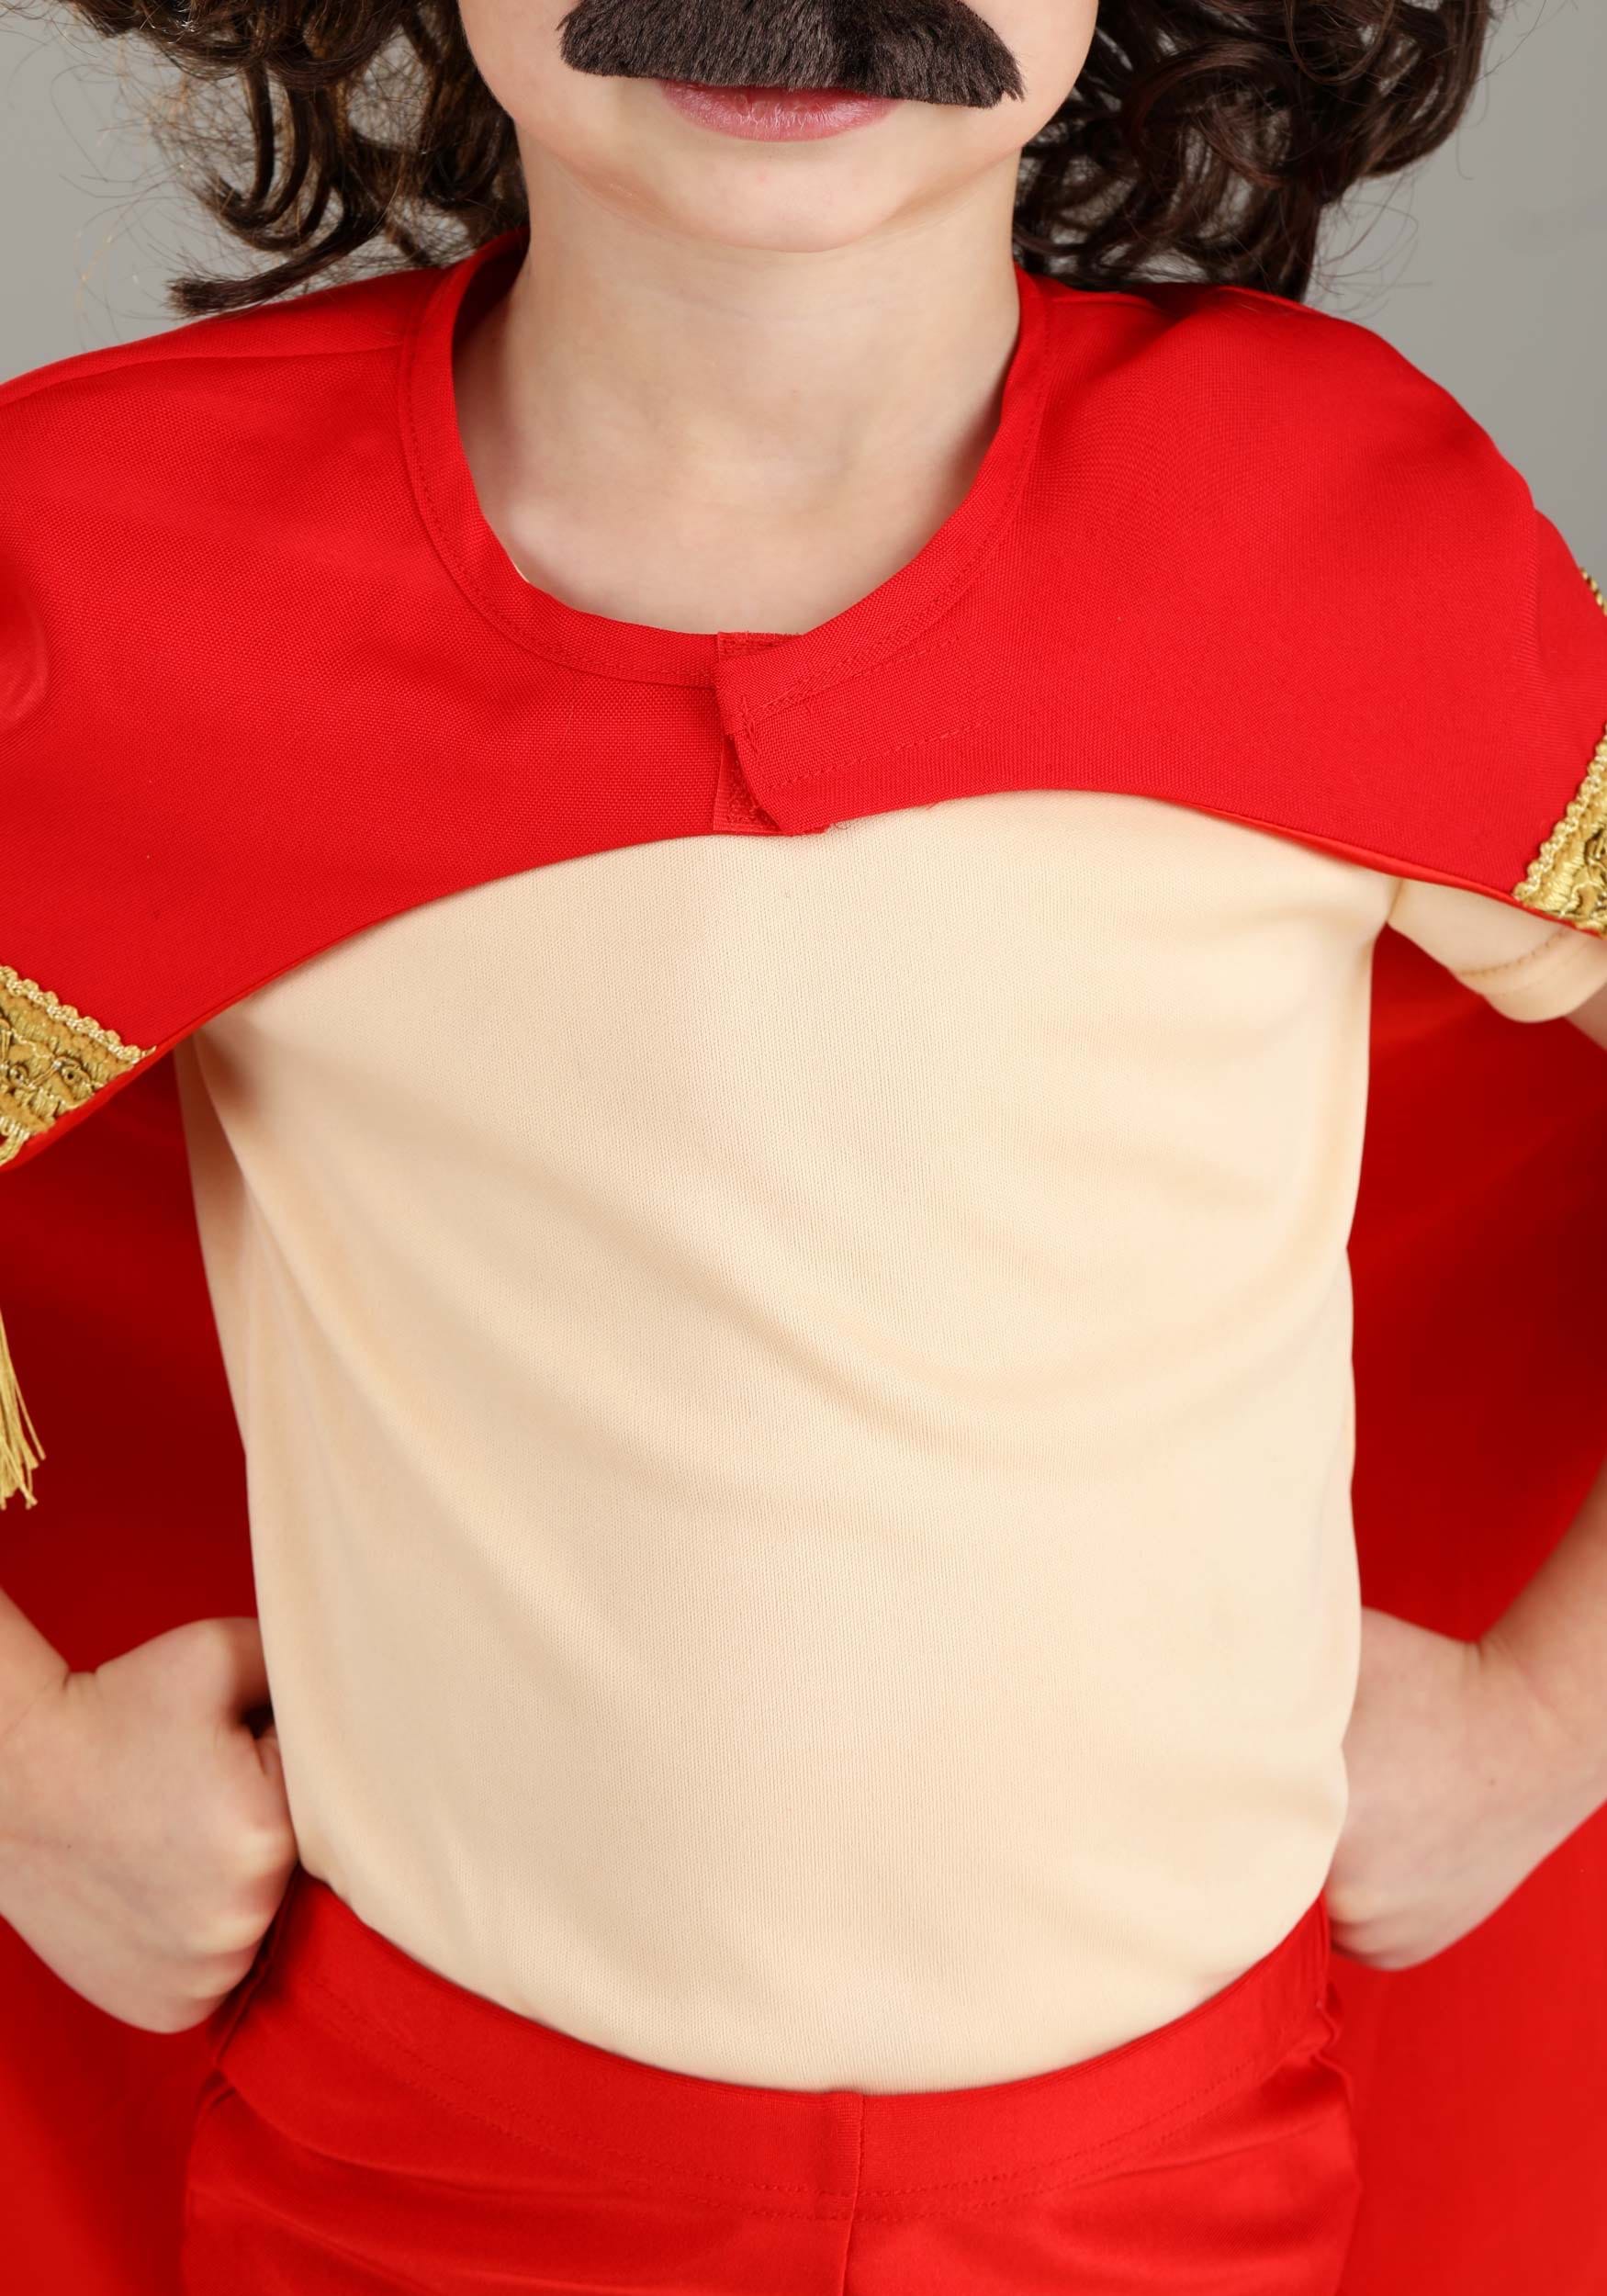 Nacho Libre Boys Costume For Toddlers